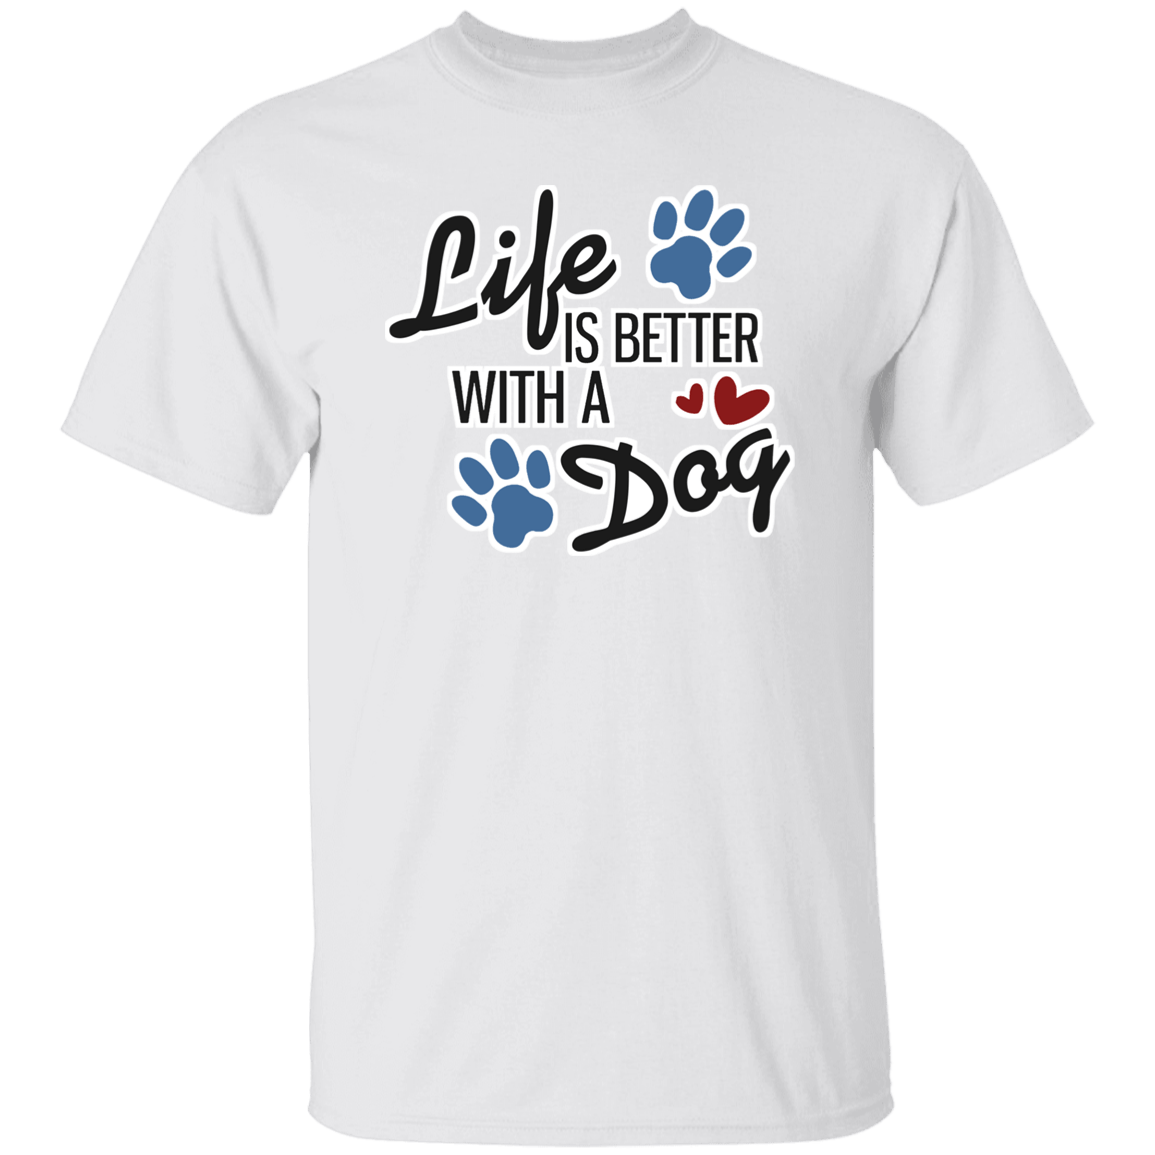 Life is better with a dog - T-Shirt.